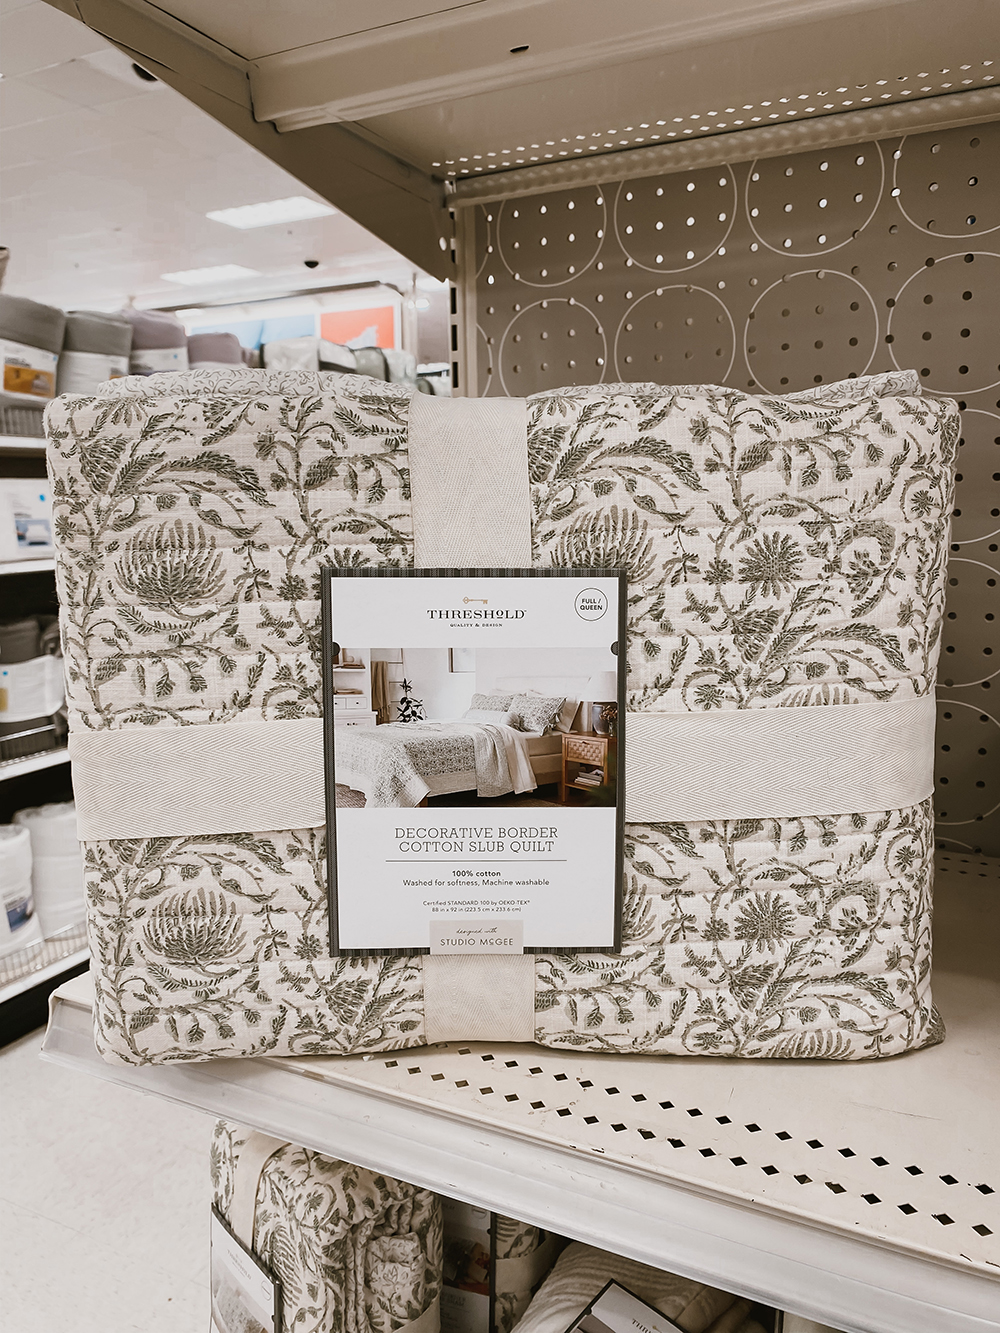 Sharing my absolute favorite 2023 spring home decor finds at Target. Between the Hearth & Hand line as well as the Studio McGee line, there are some beautiful, budget-friendly options for adding a fresh and beautiful feel to the home this upcoming season. Head to KaraLayne.com to check them out!